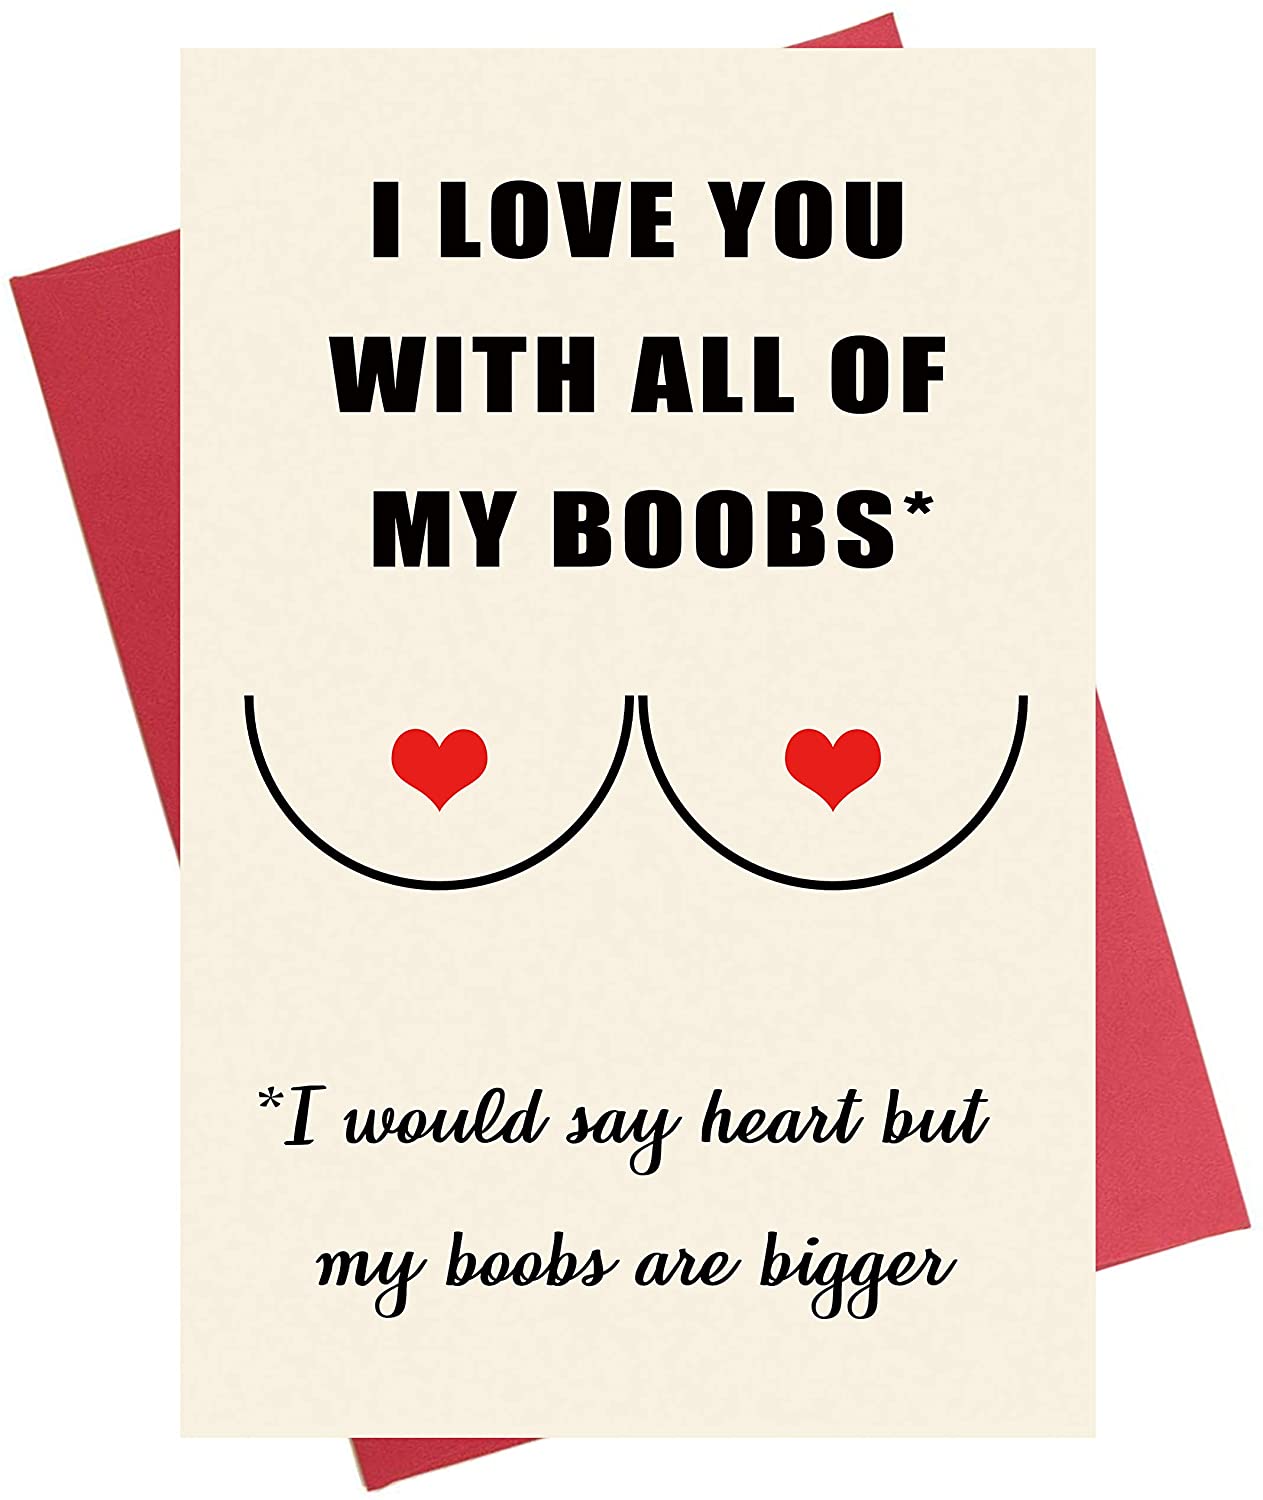 Funny Anniversary Card, Birthday Card, Love You with All of My Bobs Card for Boyfriend Husband Him